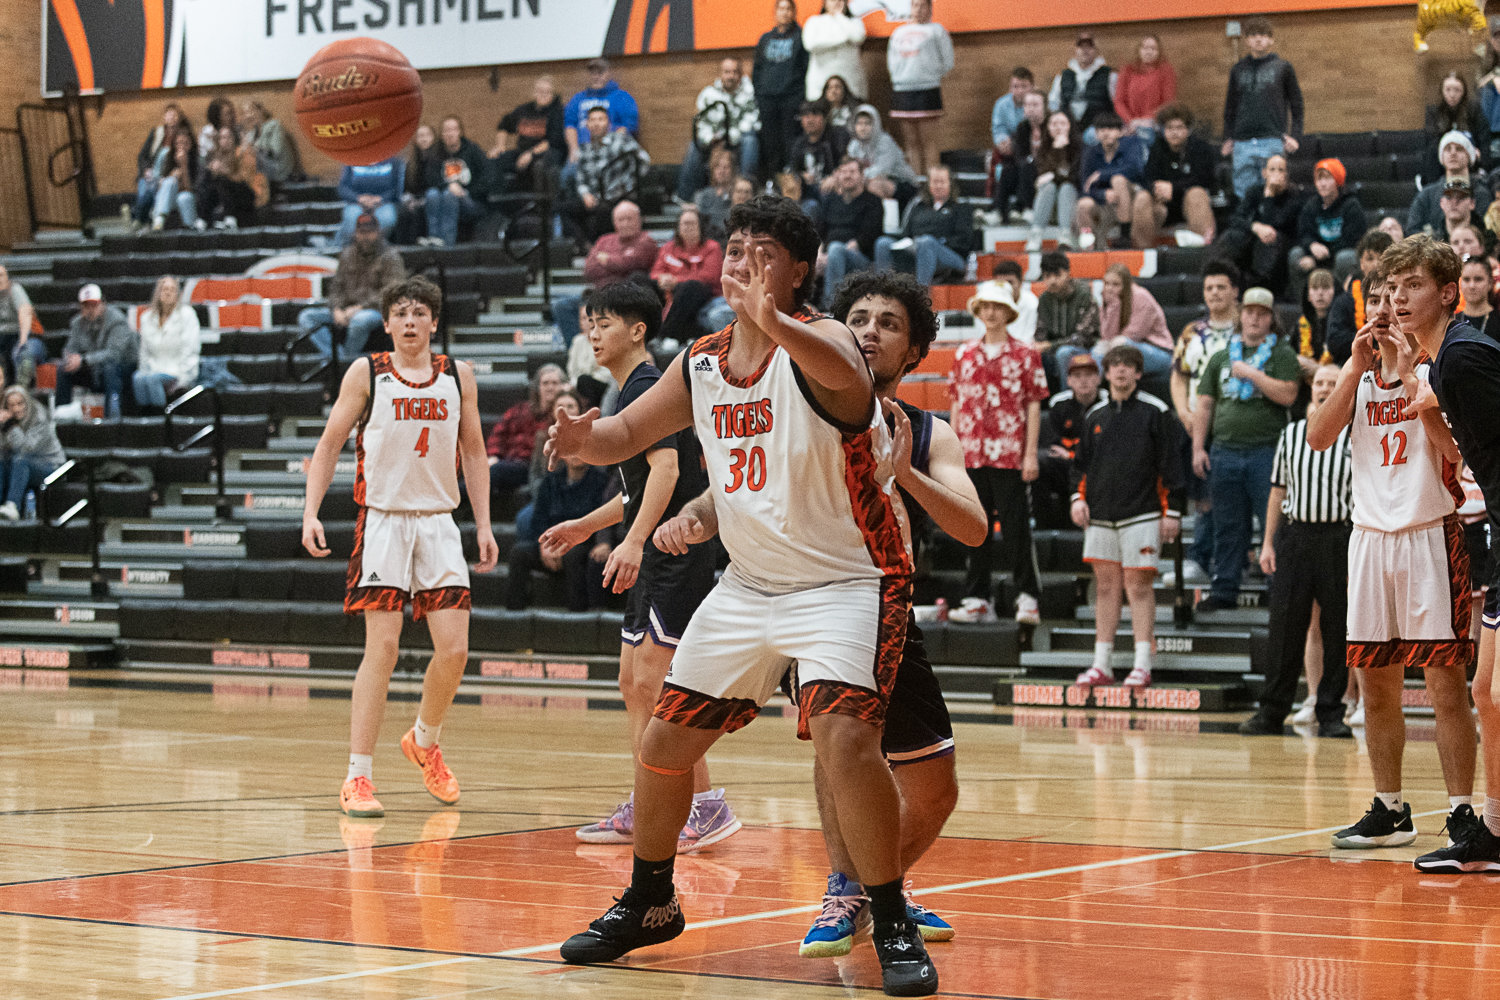 Carlos Vallejo receives the ball in the low post during Centralia's 56-34 loss to Heritage on Dec. 2. Vallejo led the Tigers with 16 points and 14 rebounds.